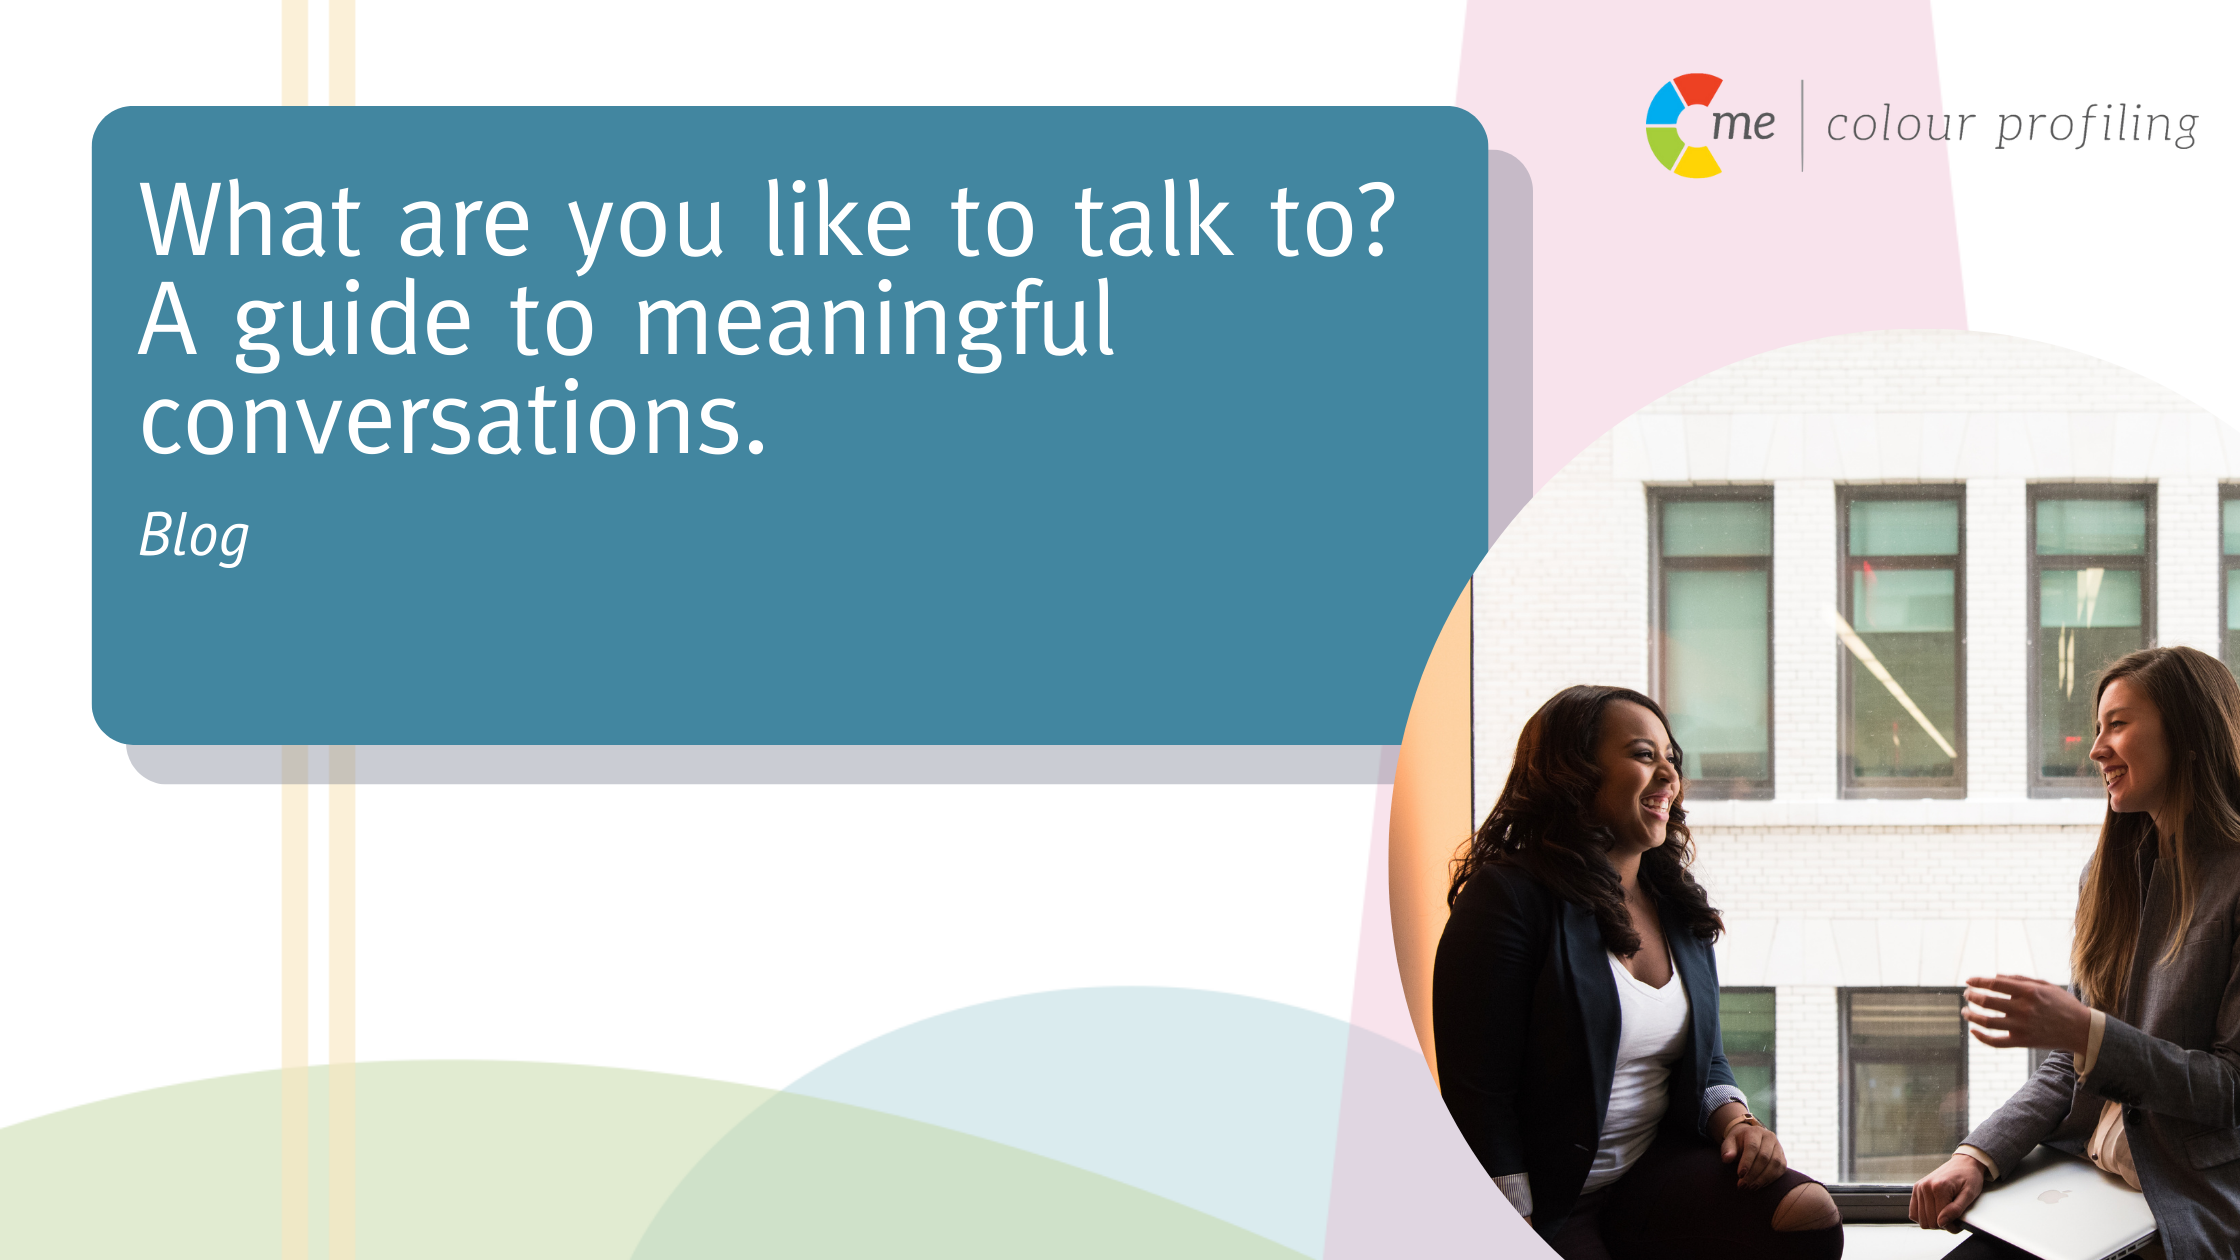 What are you like to talk to? A guide to meaningful conversations.